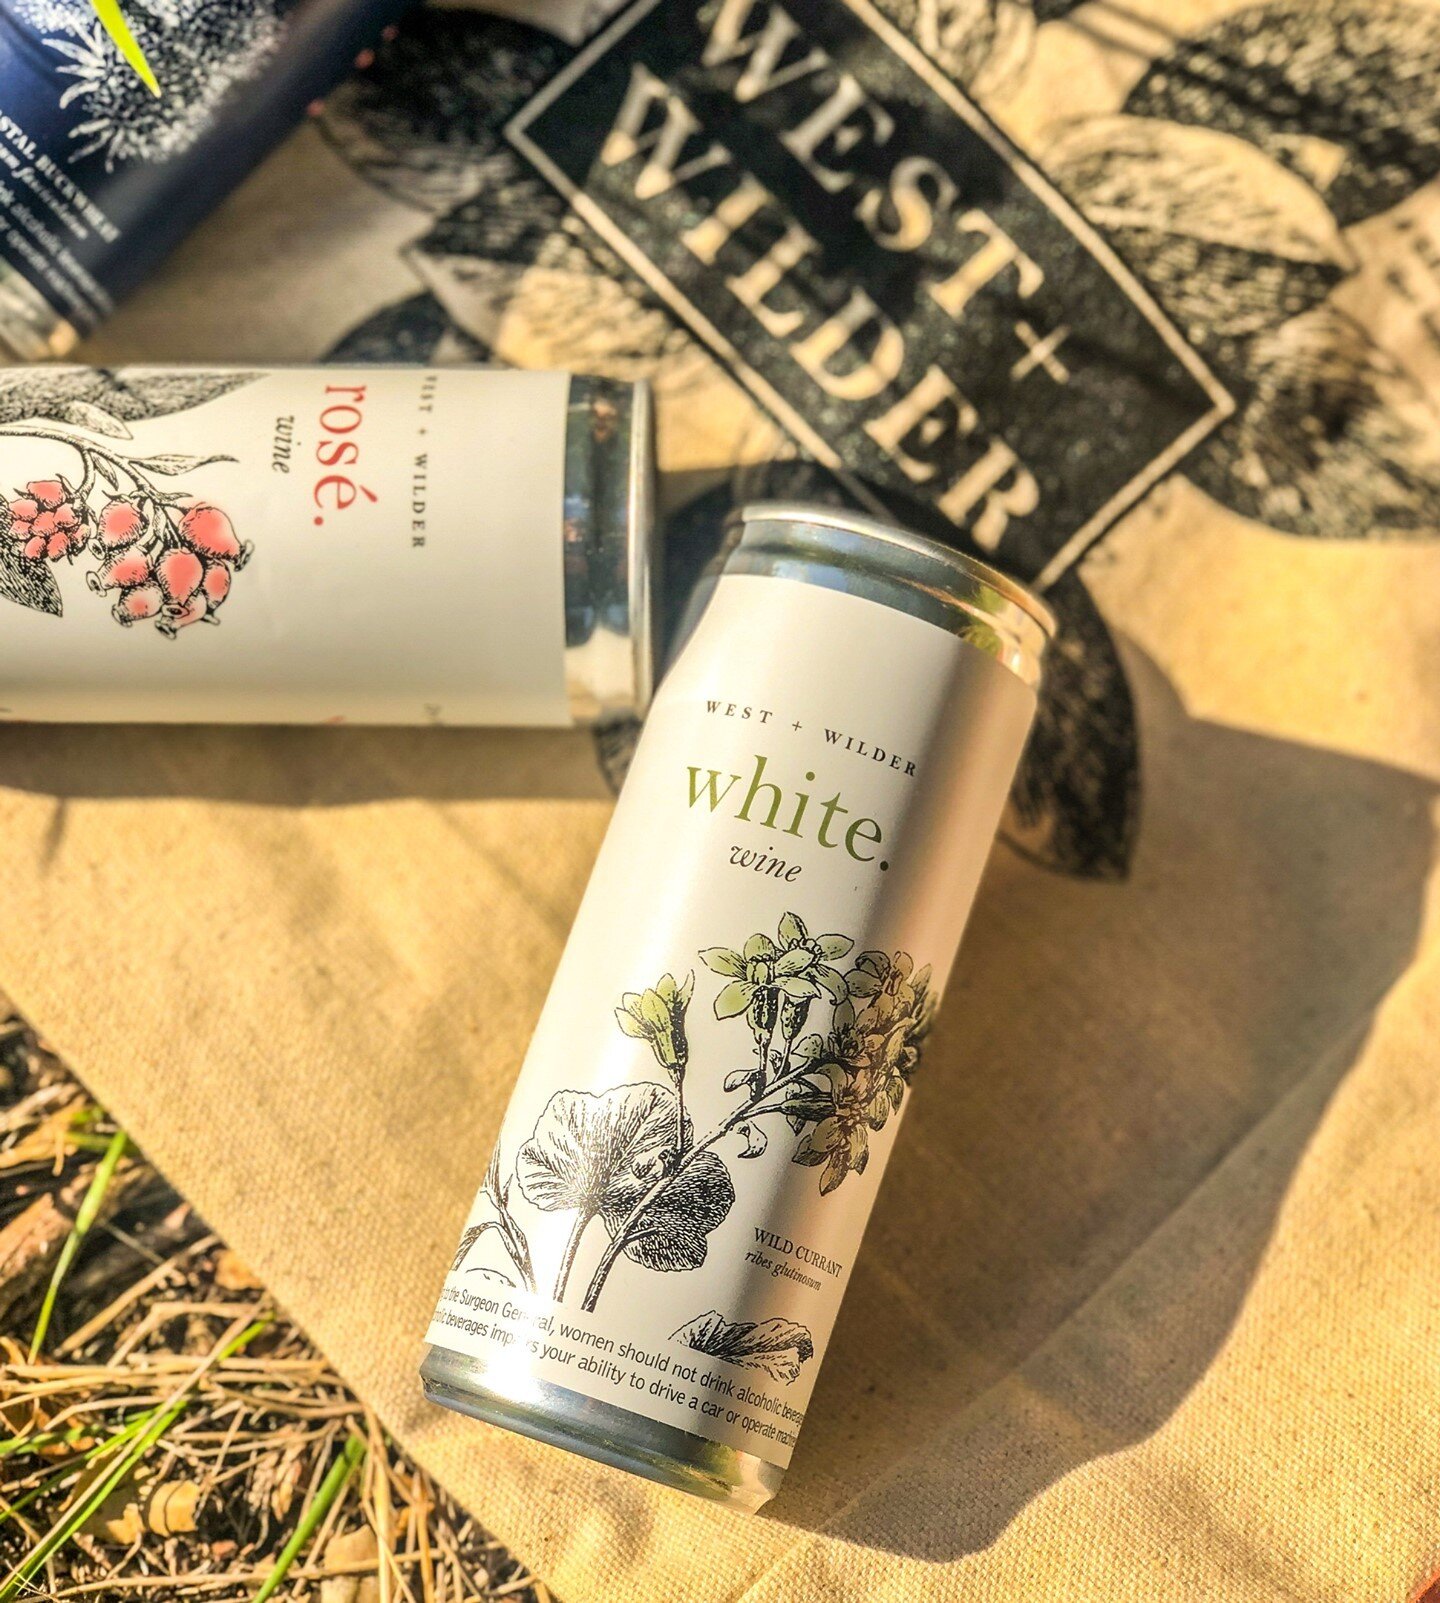 The best canned wines to buy 2021 - #westandwilder White Wine. 

 @bbcgoodfood - It&rsquo;s a very complex drop with green apples, creamy texture and salty tang. Pretty tasty all round.